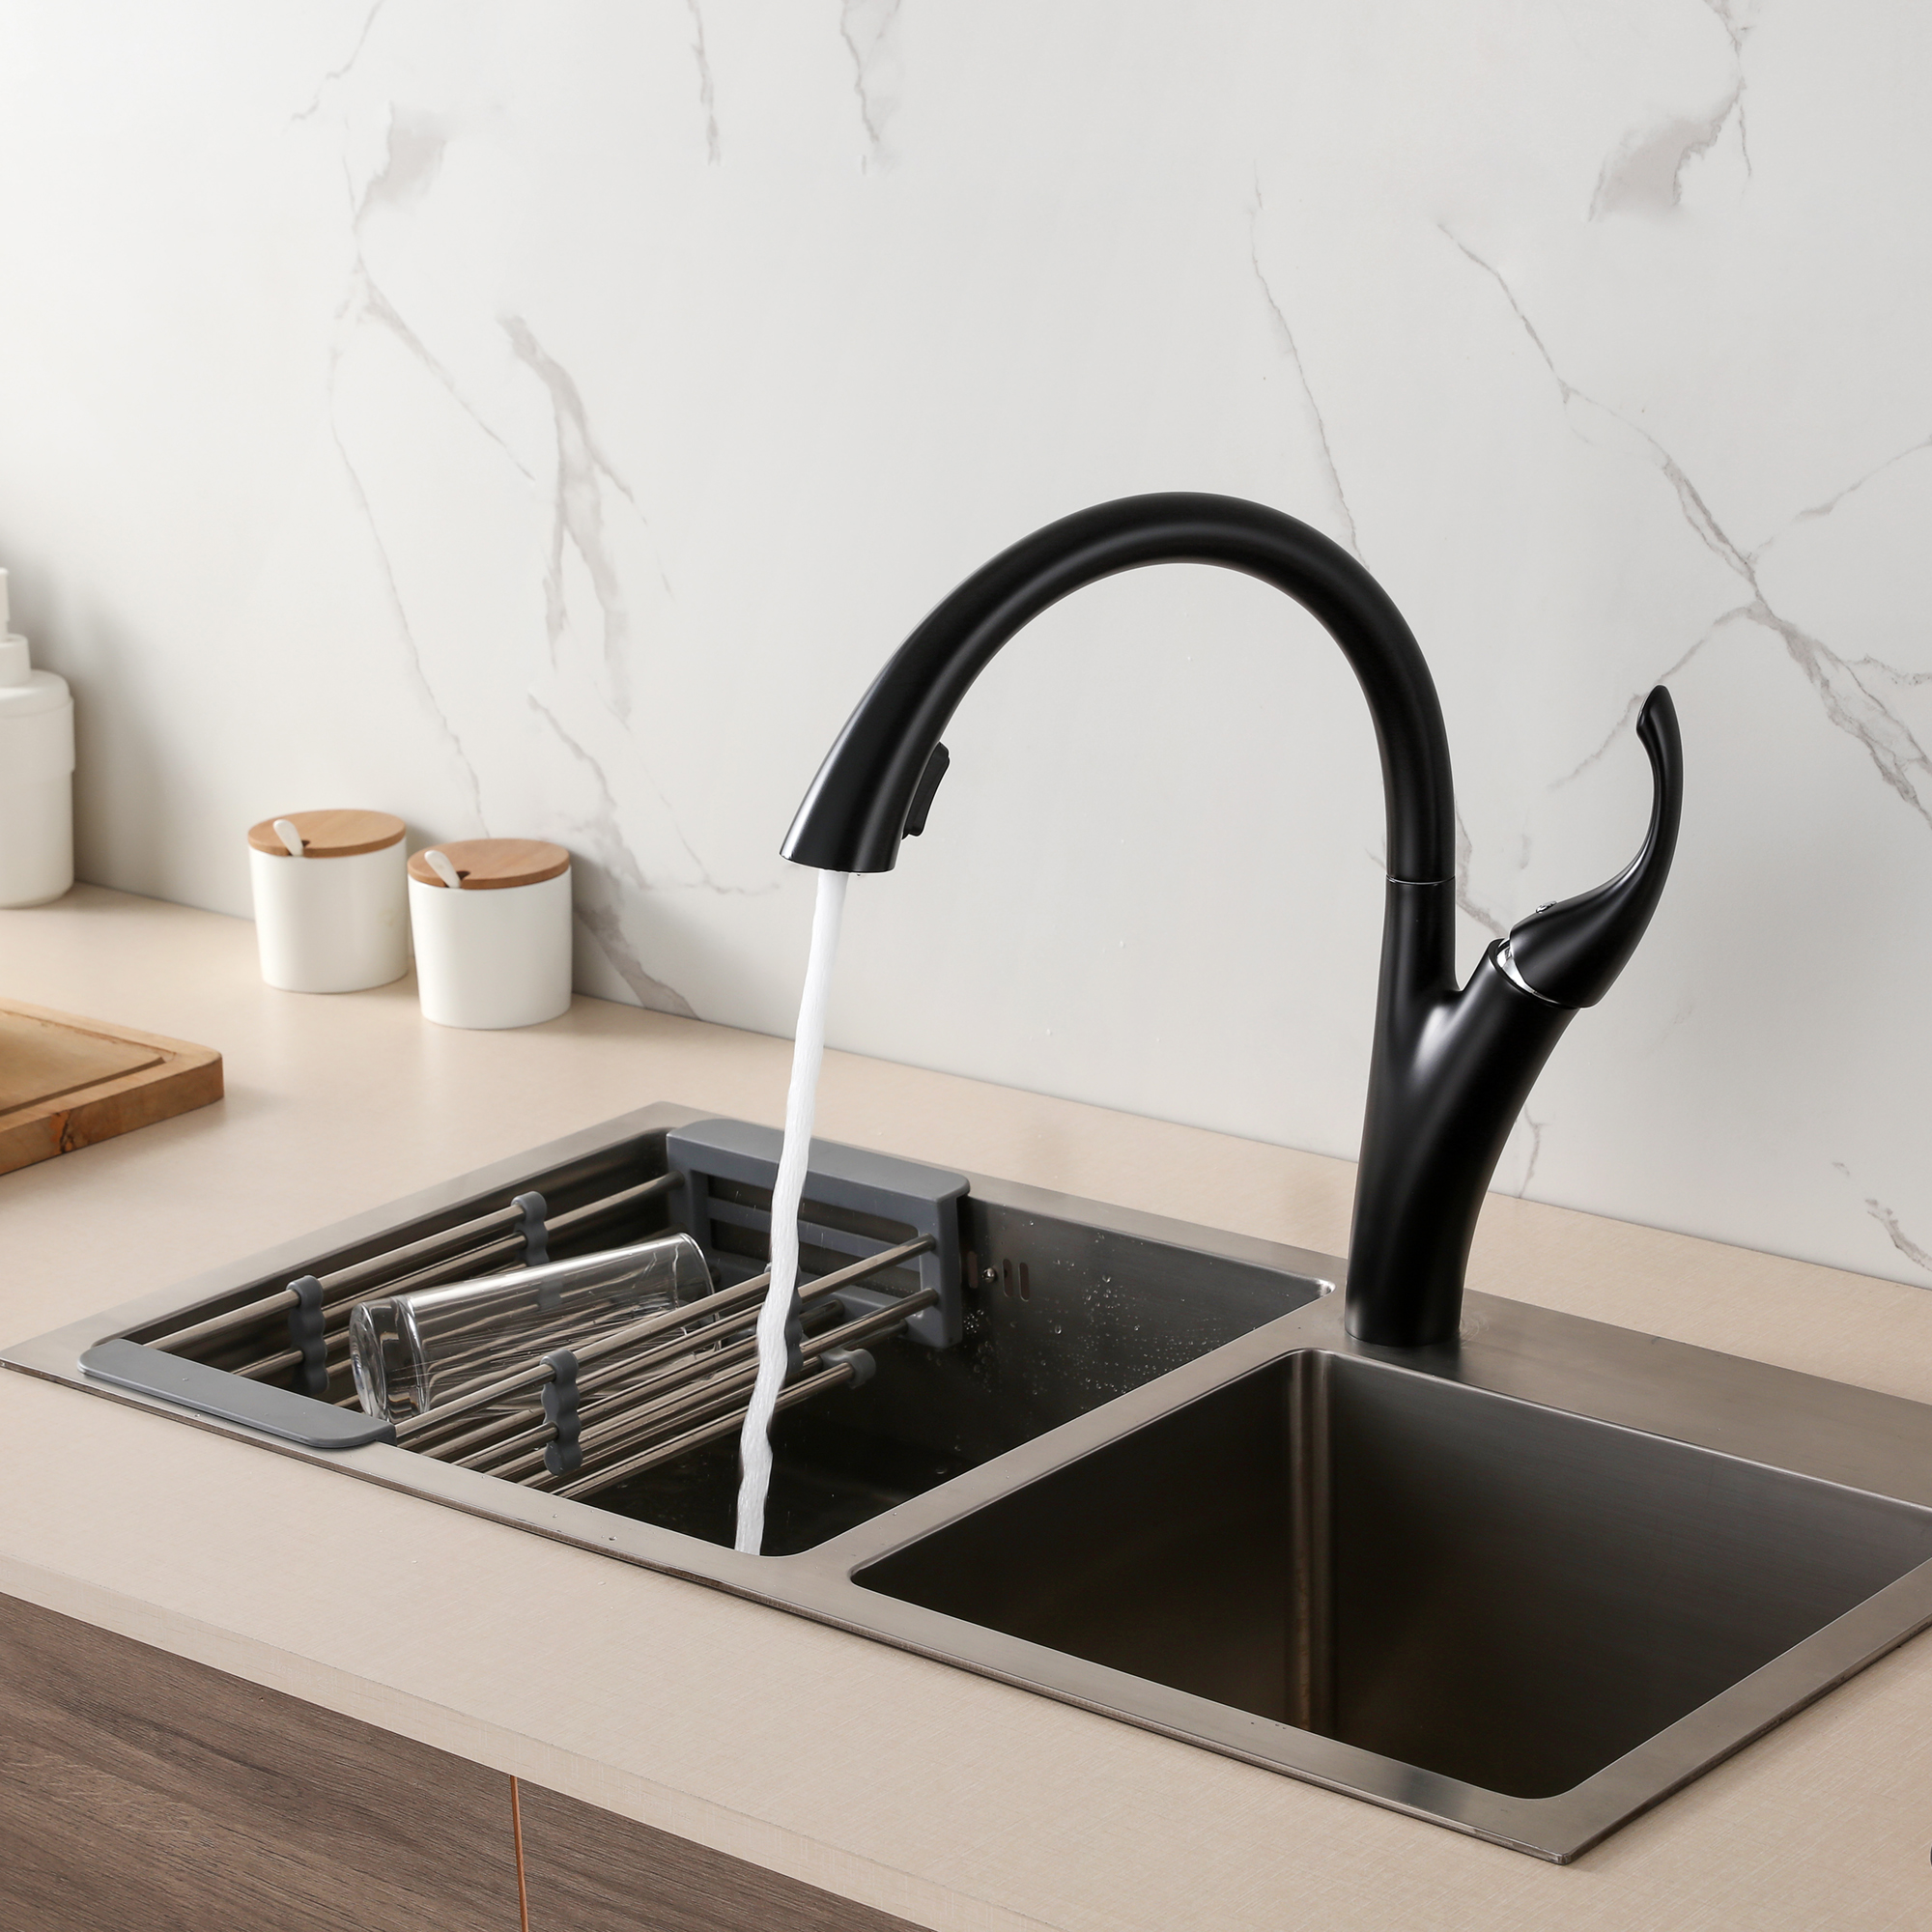 Hot Selling Mini Mixer Sink Faucet Black Kitchen Tap Made In China